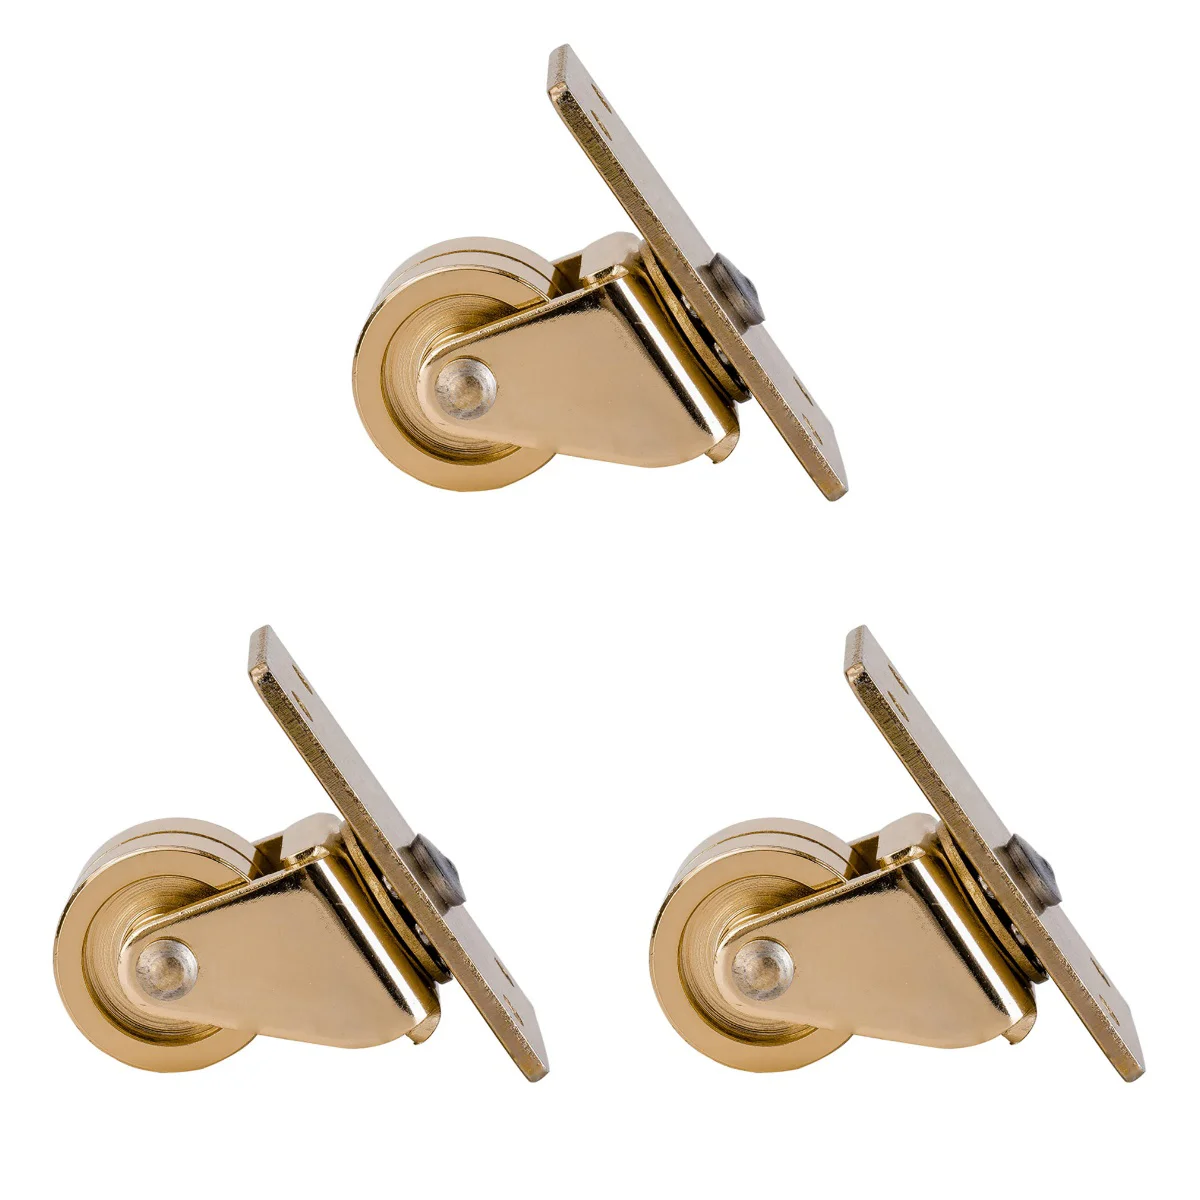 Piano Wheel Caster Accessory Metal Wheels Upright Furniture Casters Moving Mobileswivel Protectors Floor Brass Duty Heavy Supply